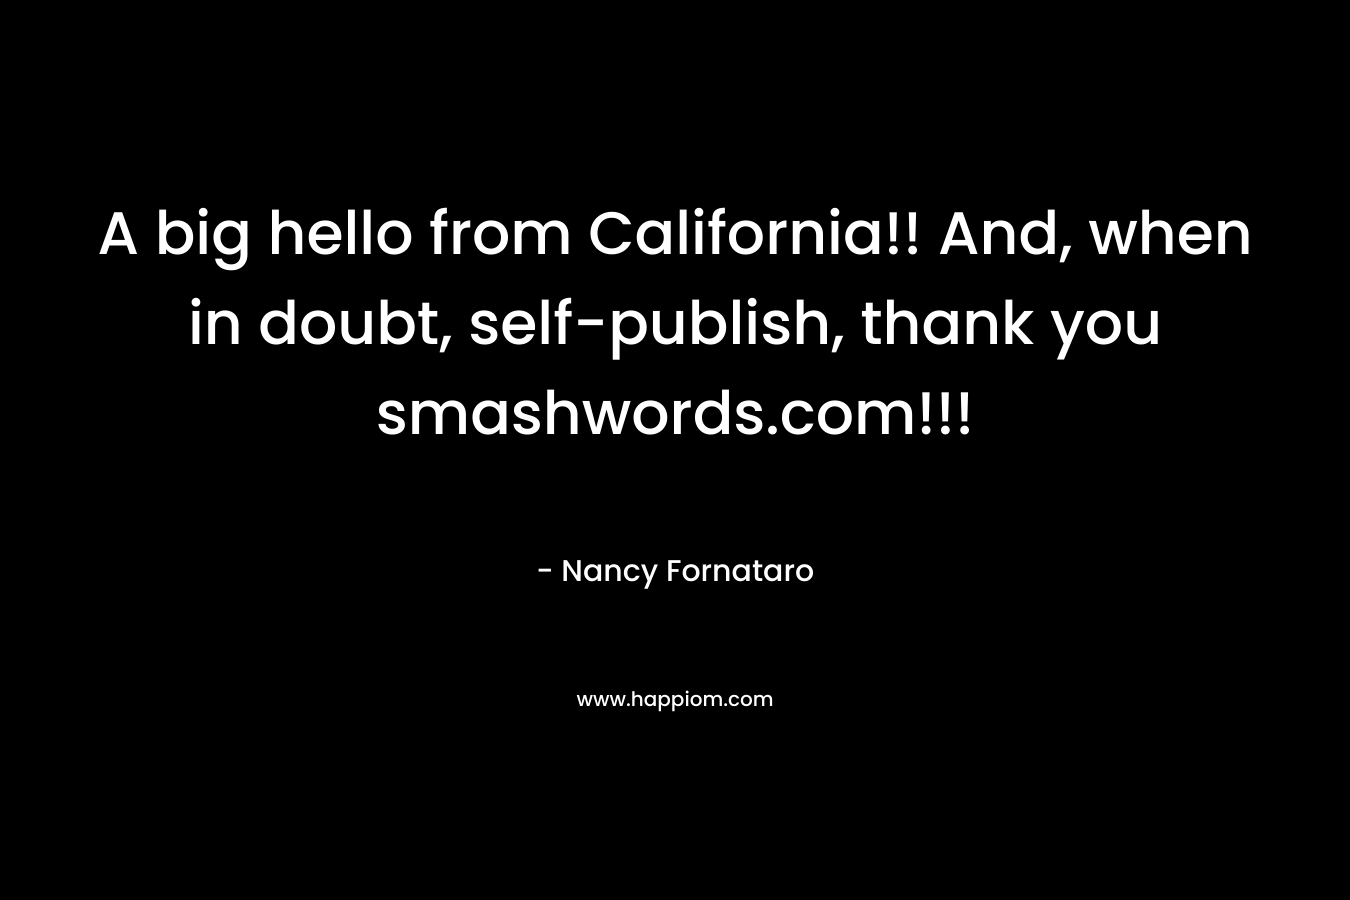 A big hello from California!! And, when in doubt, self-publish, thank you smashwords.com!!! – Nancy Fornataro